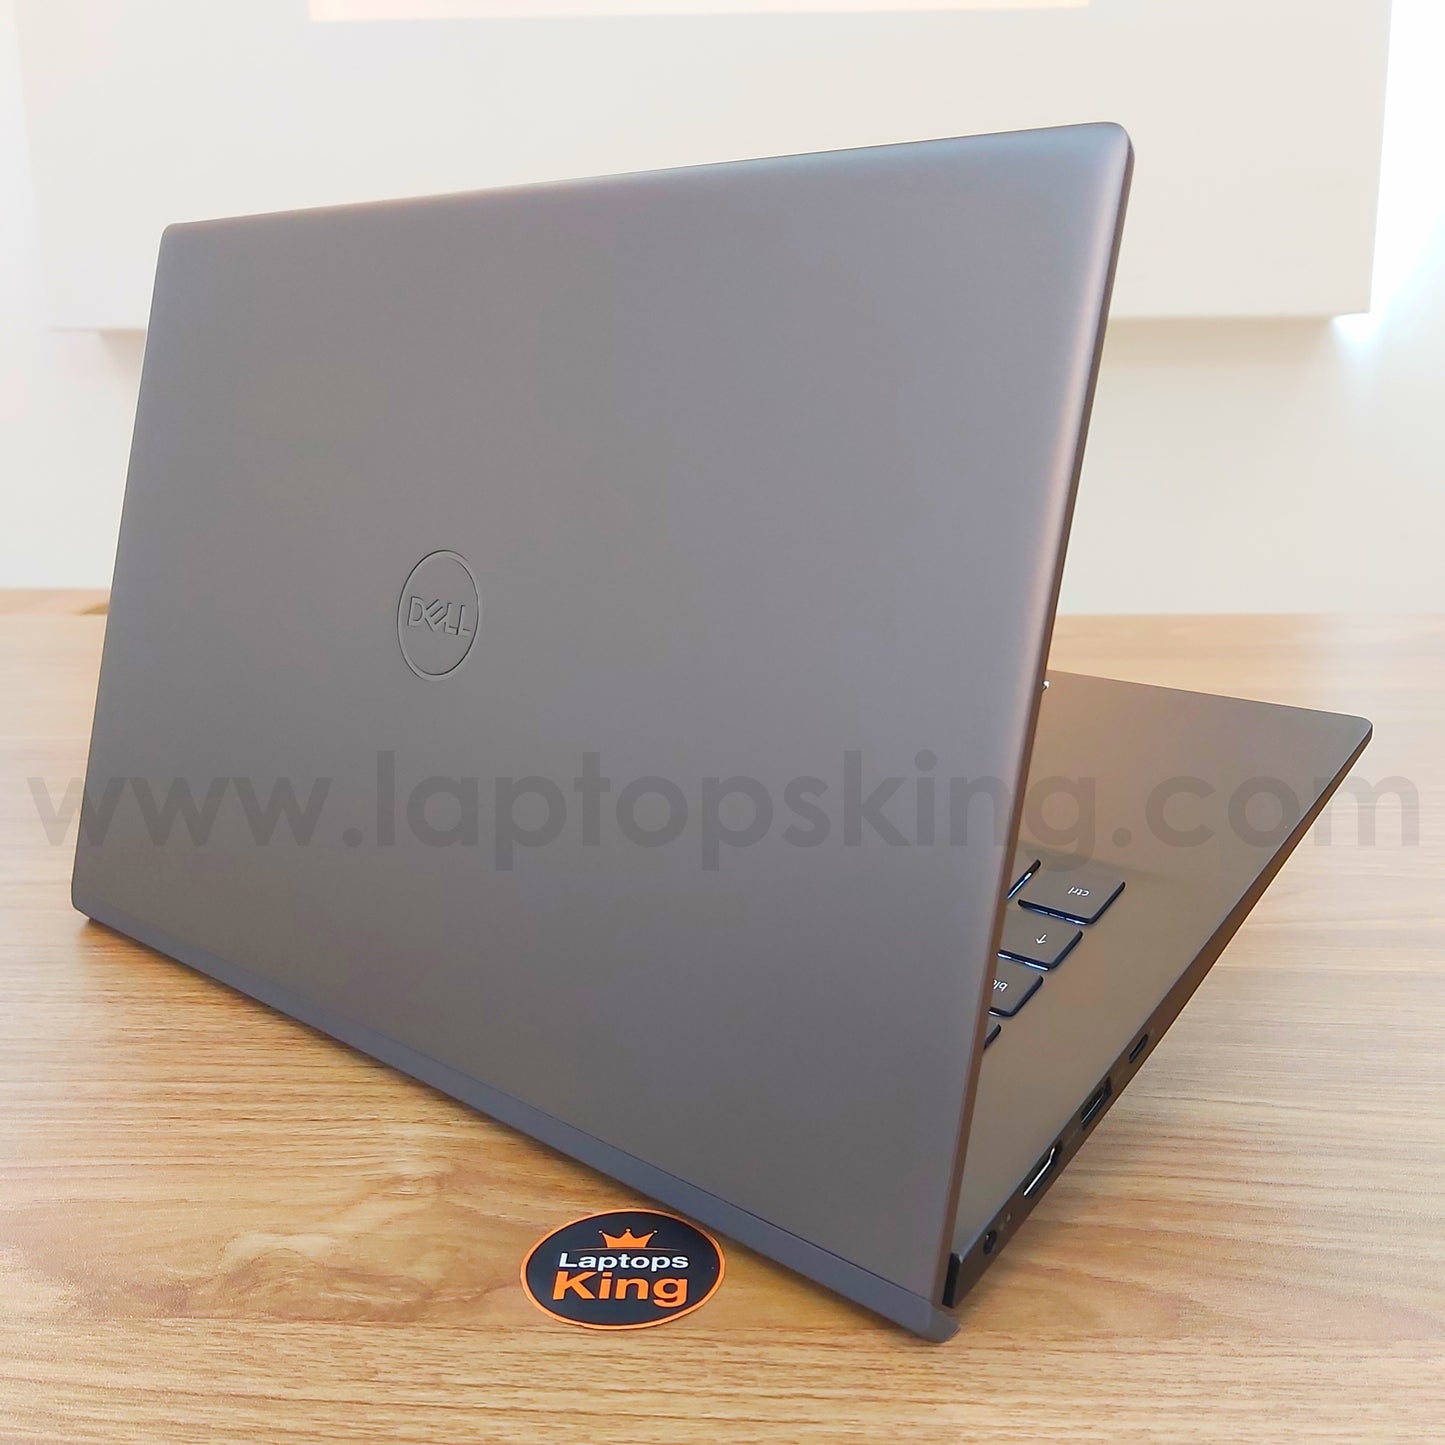 Dell Vostro 5402 i7-1165G7 IRIS XE 14" Laptop Offers (New Open Box)